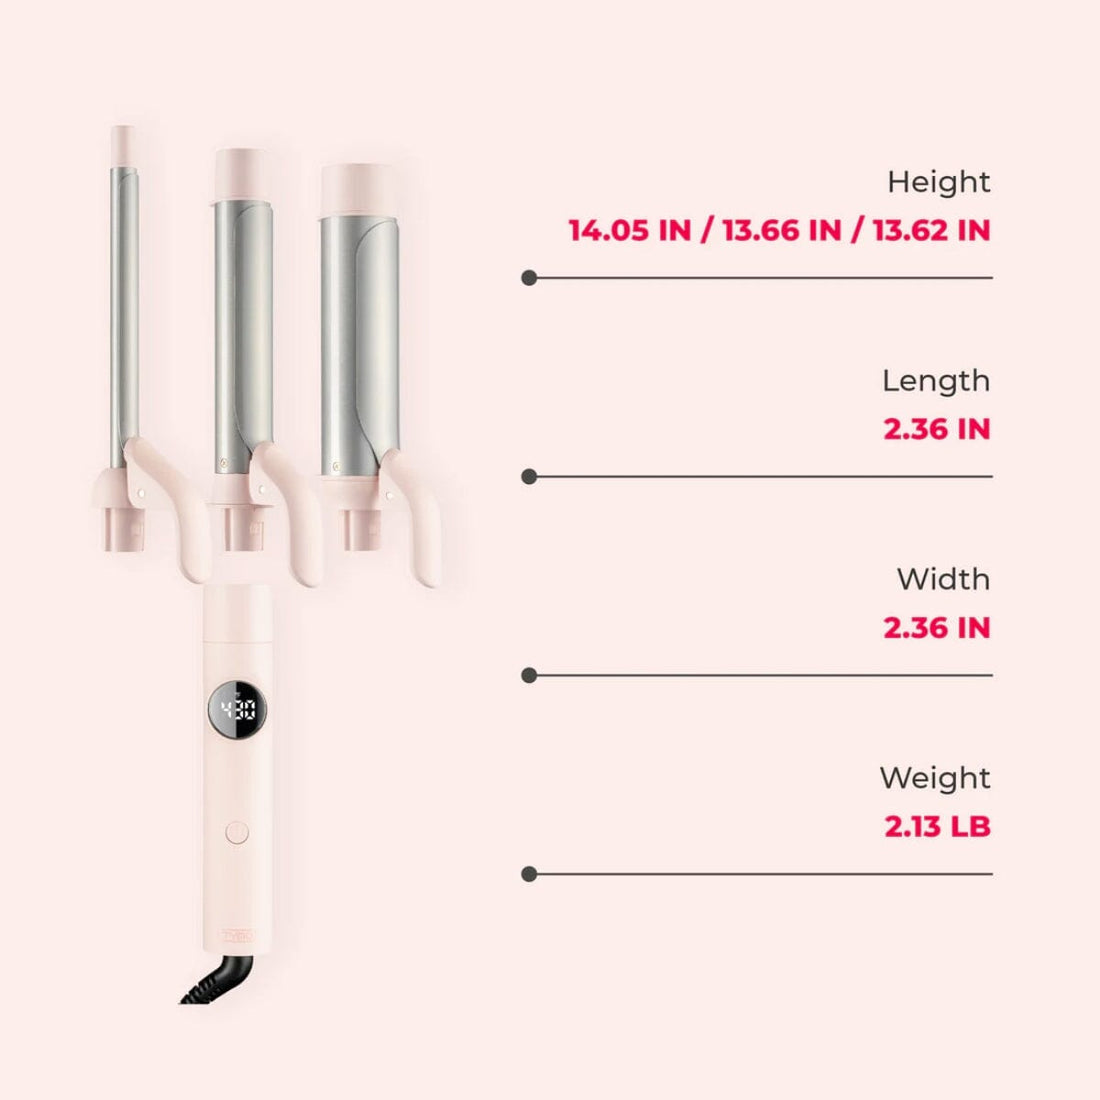 HairMNL TYMO Cues 3-in-1 Interchangeable Curling Iron Pink HC-502P Dimensions